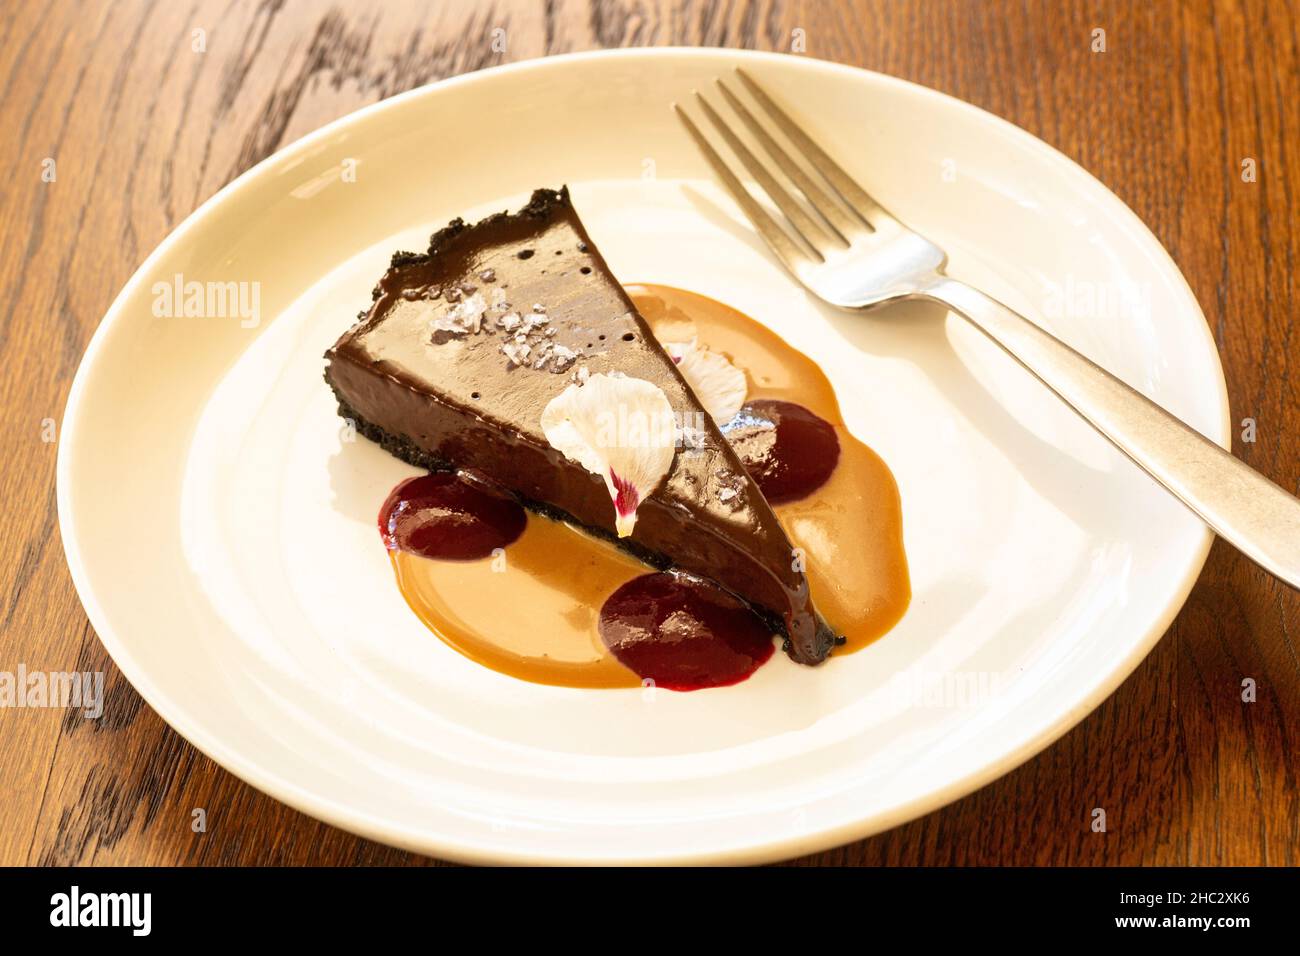 Mexican salted chocolate tart with dulce de leche raspberry sauce Stock Photo